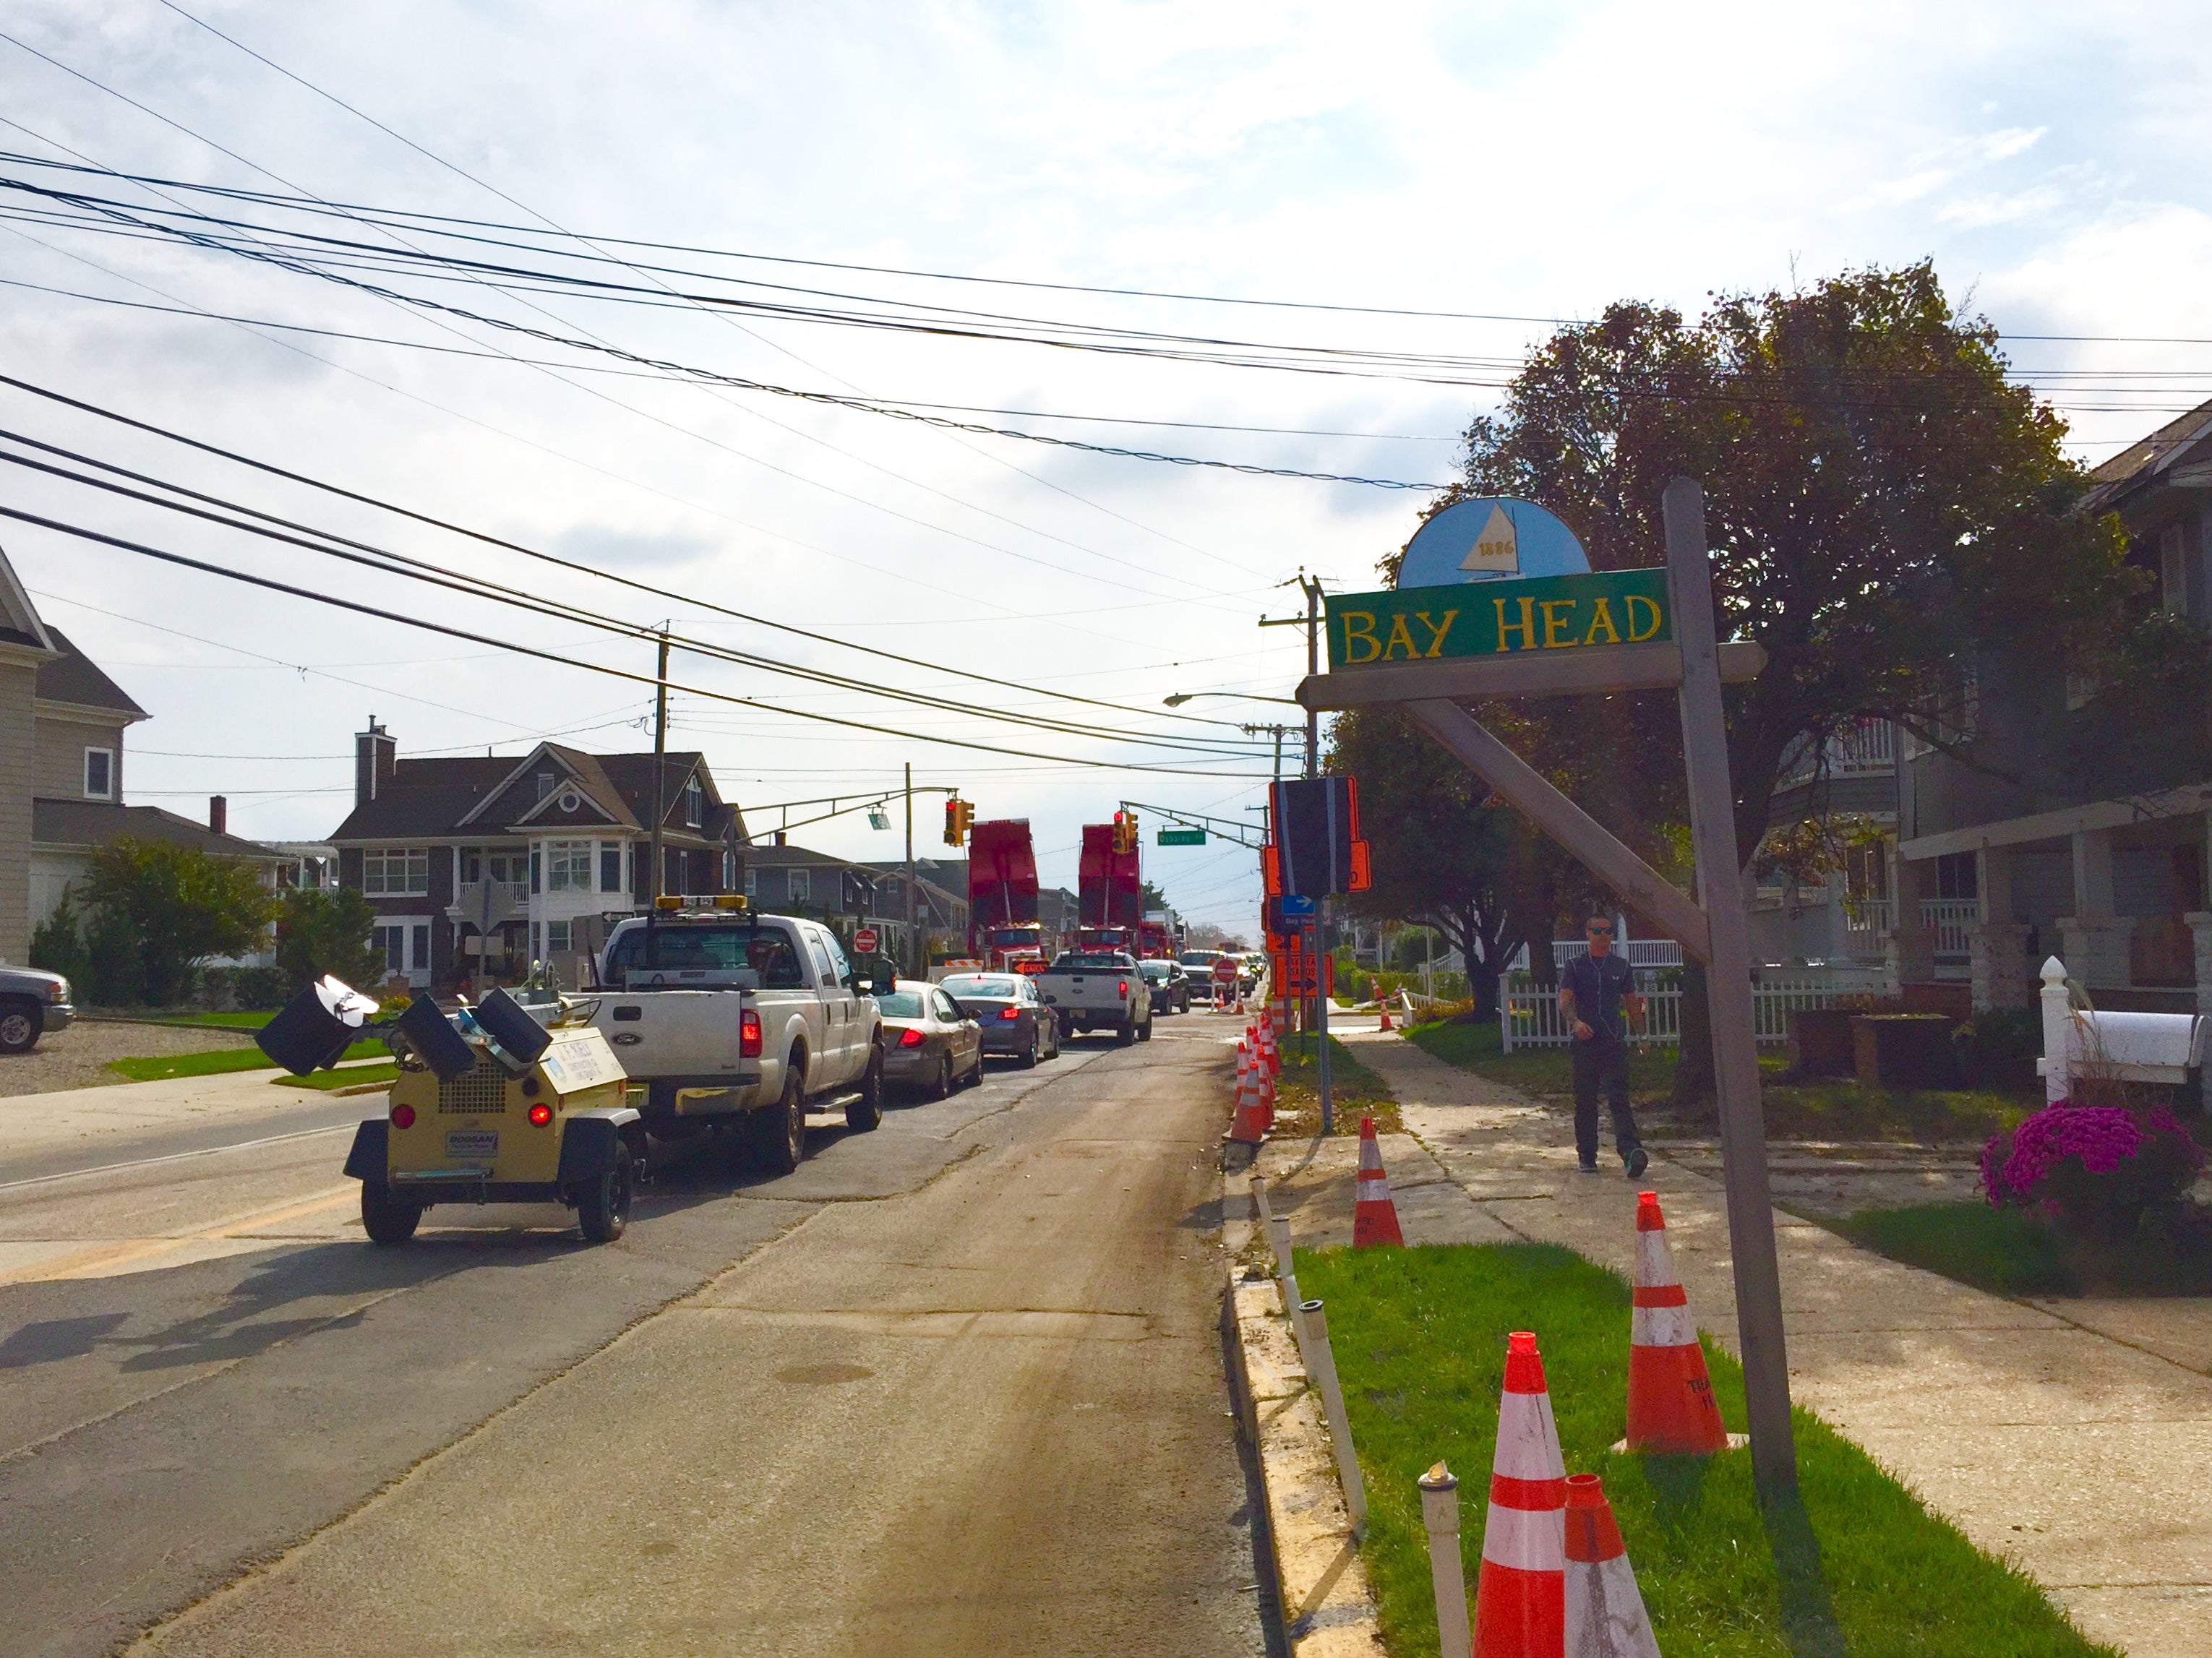  Route 35 in Bay Head on Oct. 29, 2014. (Photo: Justin Auciello/for NewsWorks) 